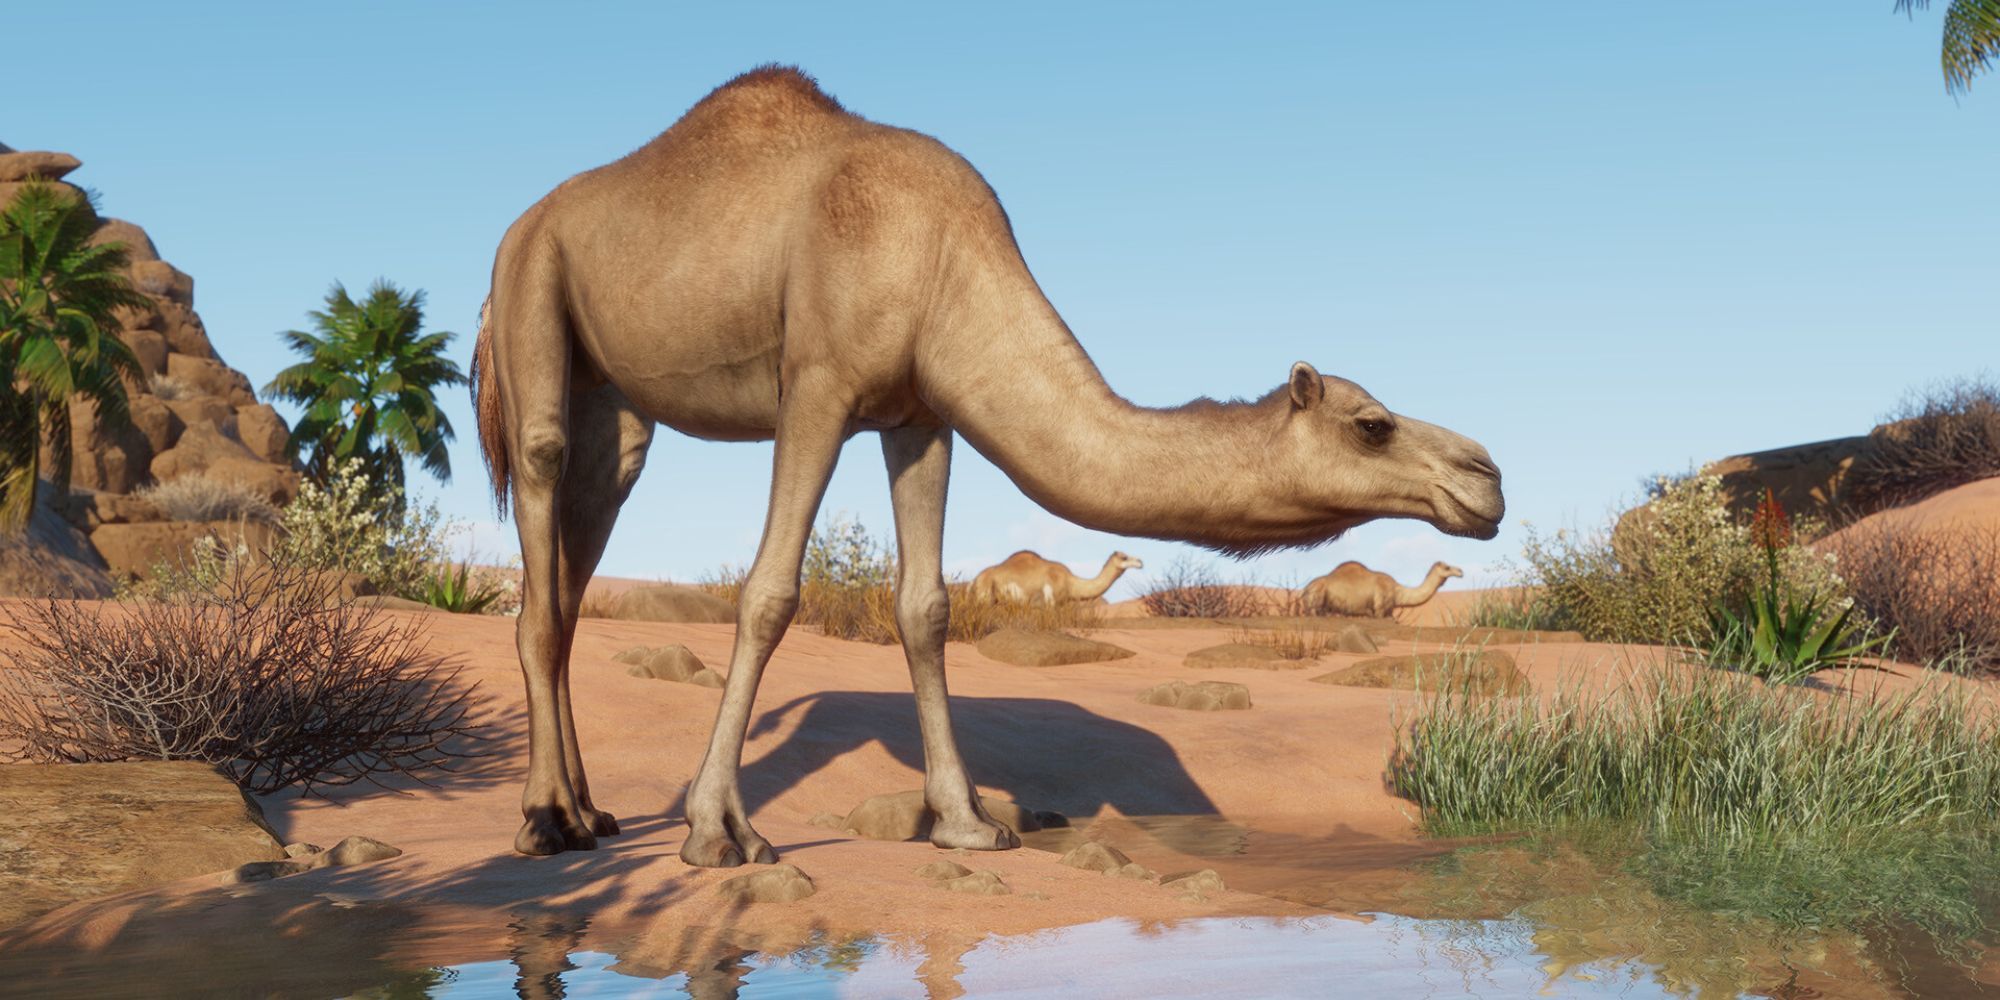 A camel in an oasis in Planet Zoo